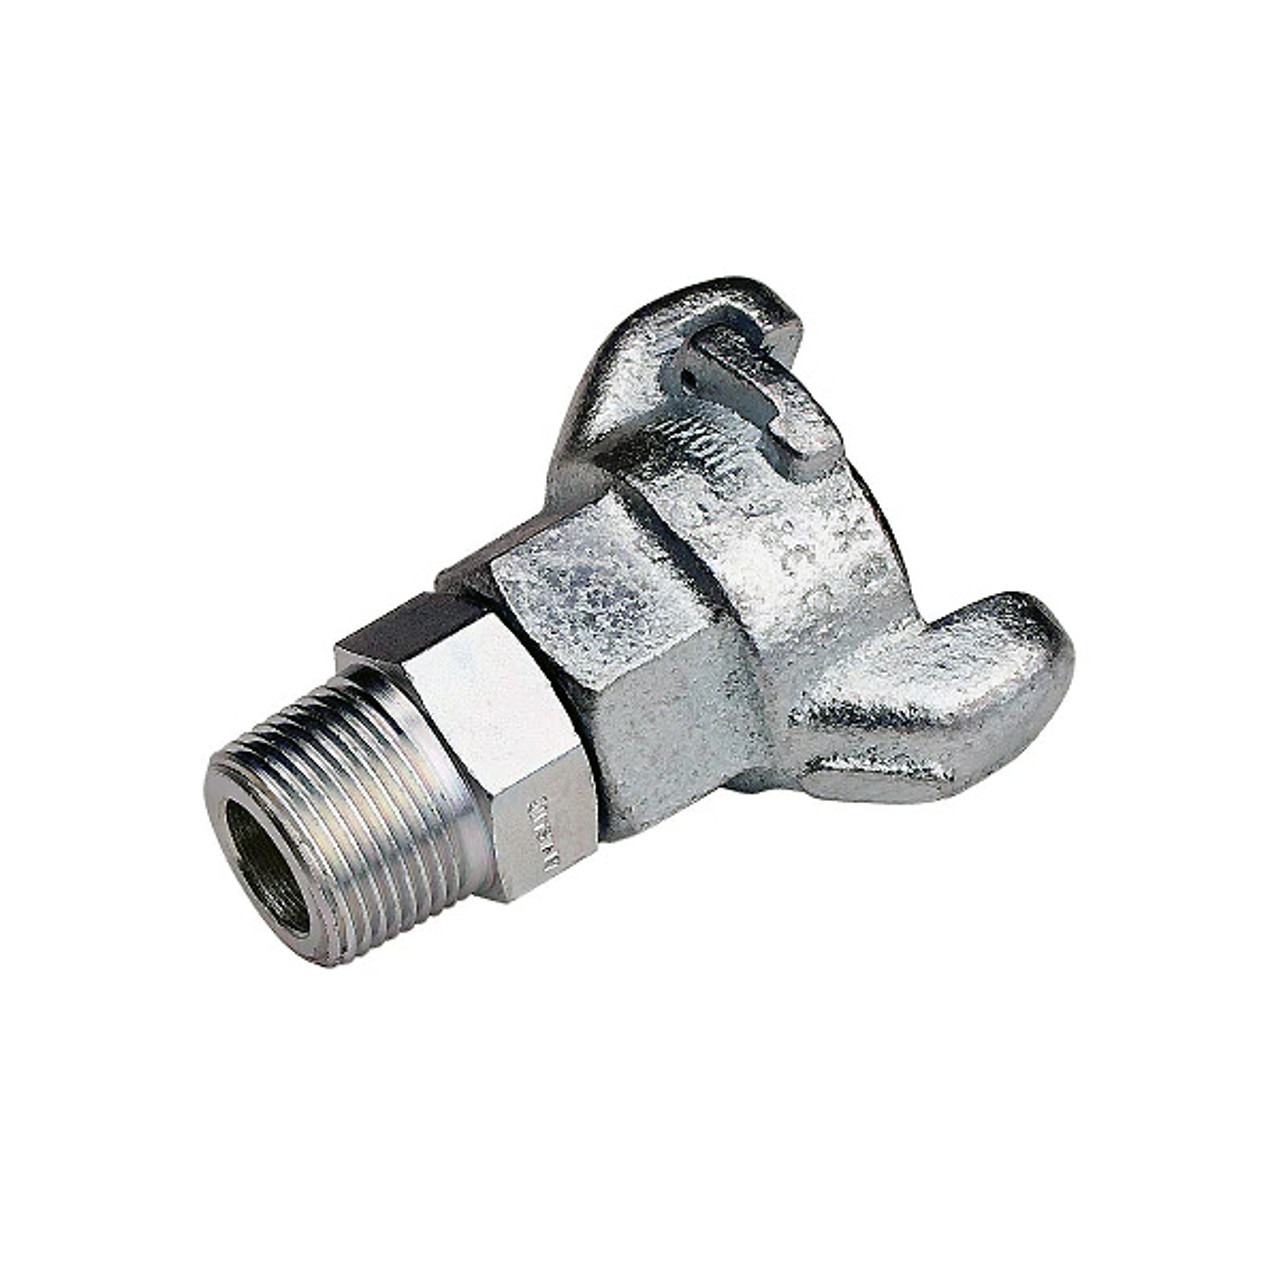 Universal Coupling 3/4" x 3/4" MPT Chicago Fitting